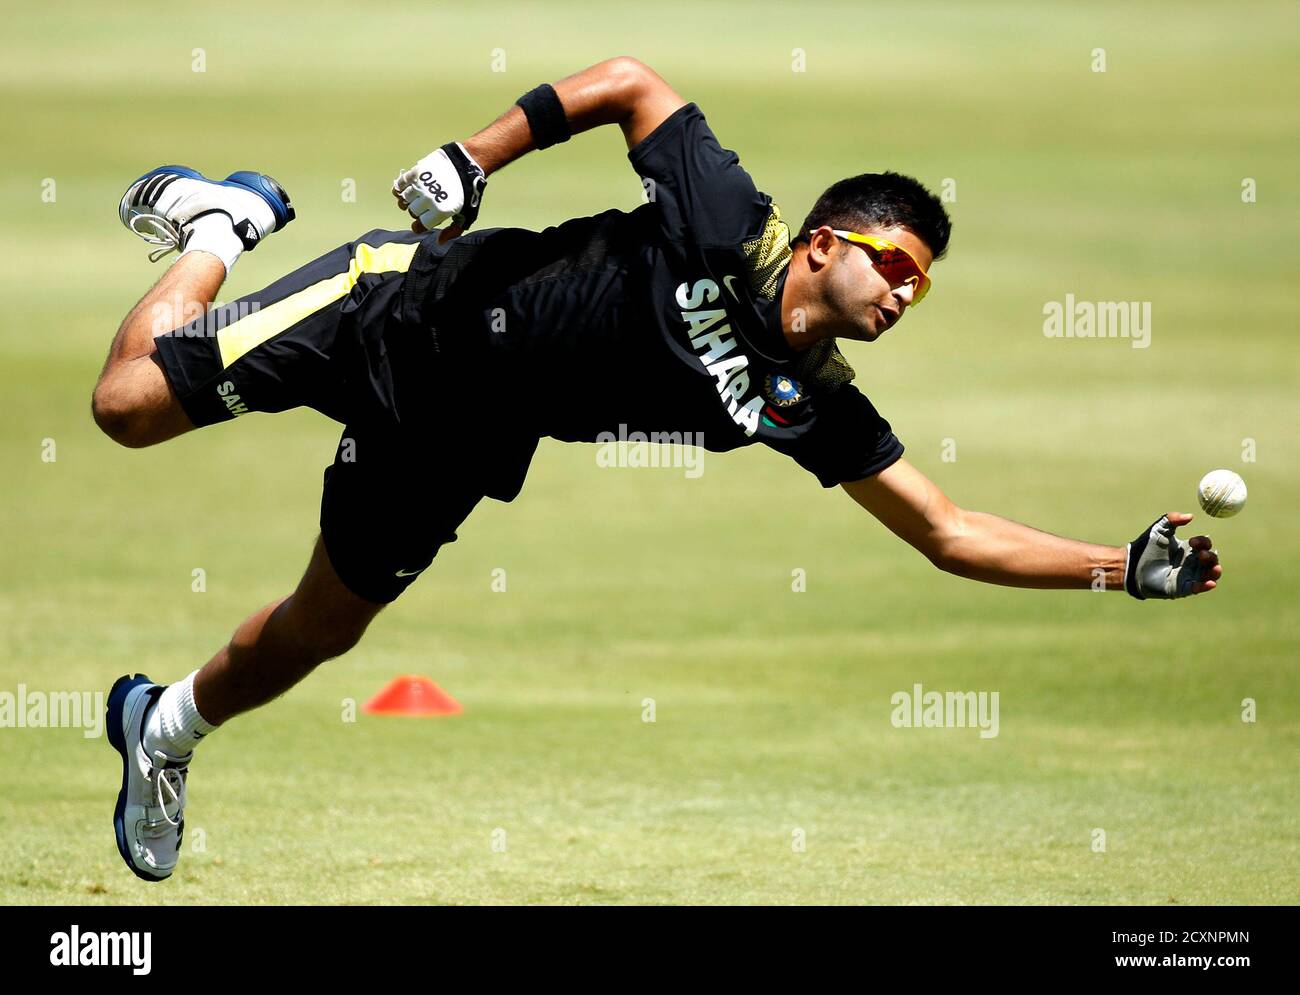 India's cricket player Suresh Raina takes part in a training session ahead of their first One-Day International (ODI)  against South Africa on Thursday, in Johannesburg December 4, 2013. REUTERS/Siphiwe Sibeko (SOUTH AFRICA - Tags: SPORT CRICKET) Stock Photo